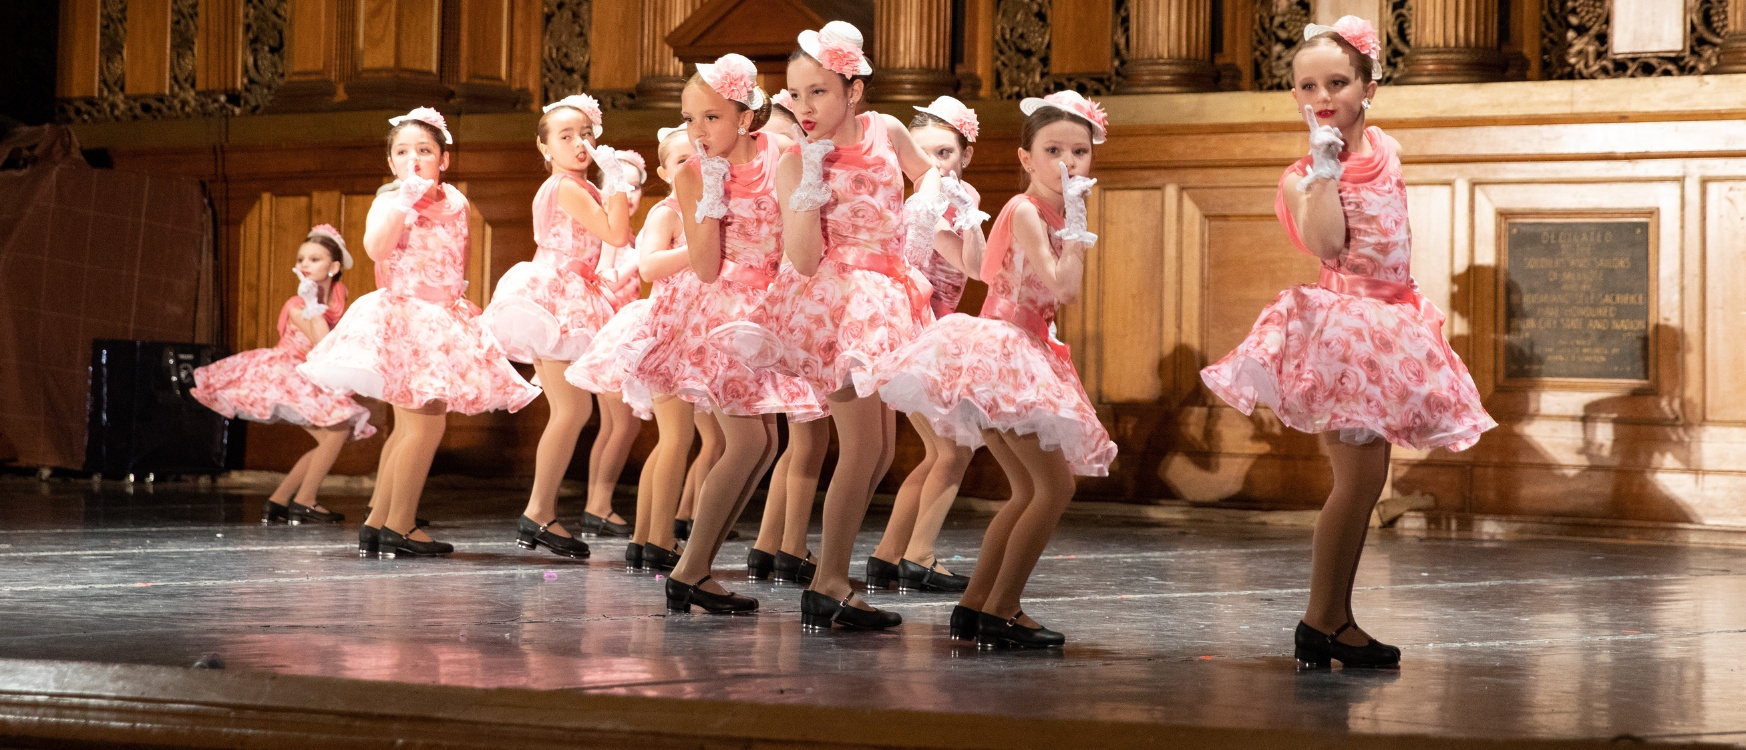 Tap, ballet, and jazz dance classes